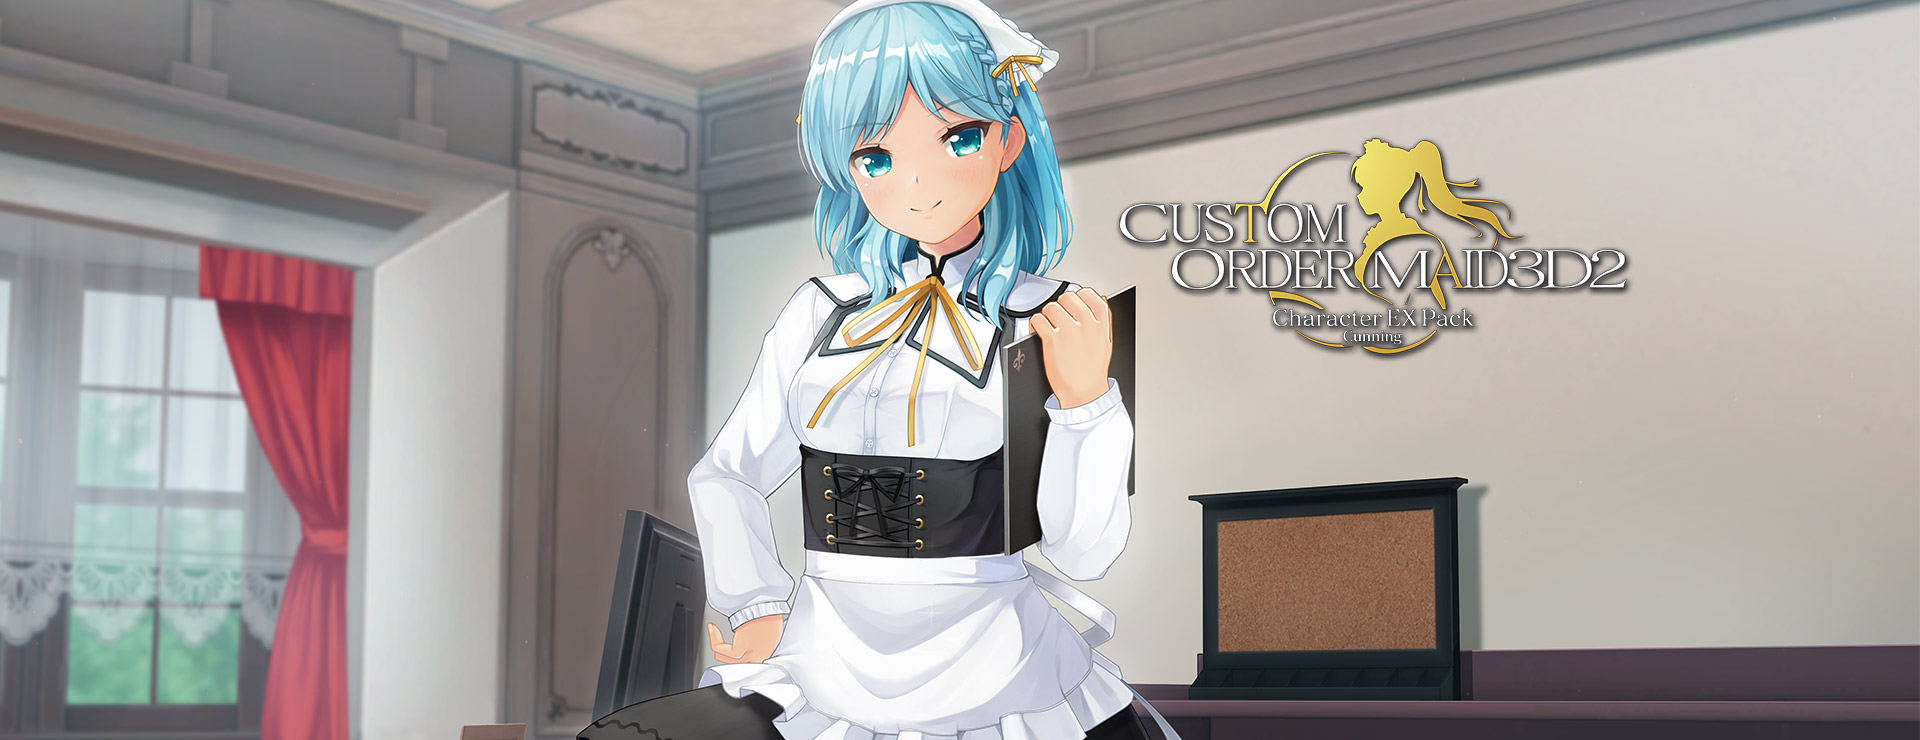 Custom Order Maid 3D: Character EX Pack Cunning - 仿真游戏 遊戲